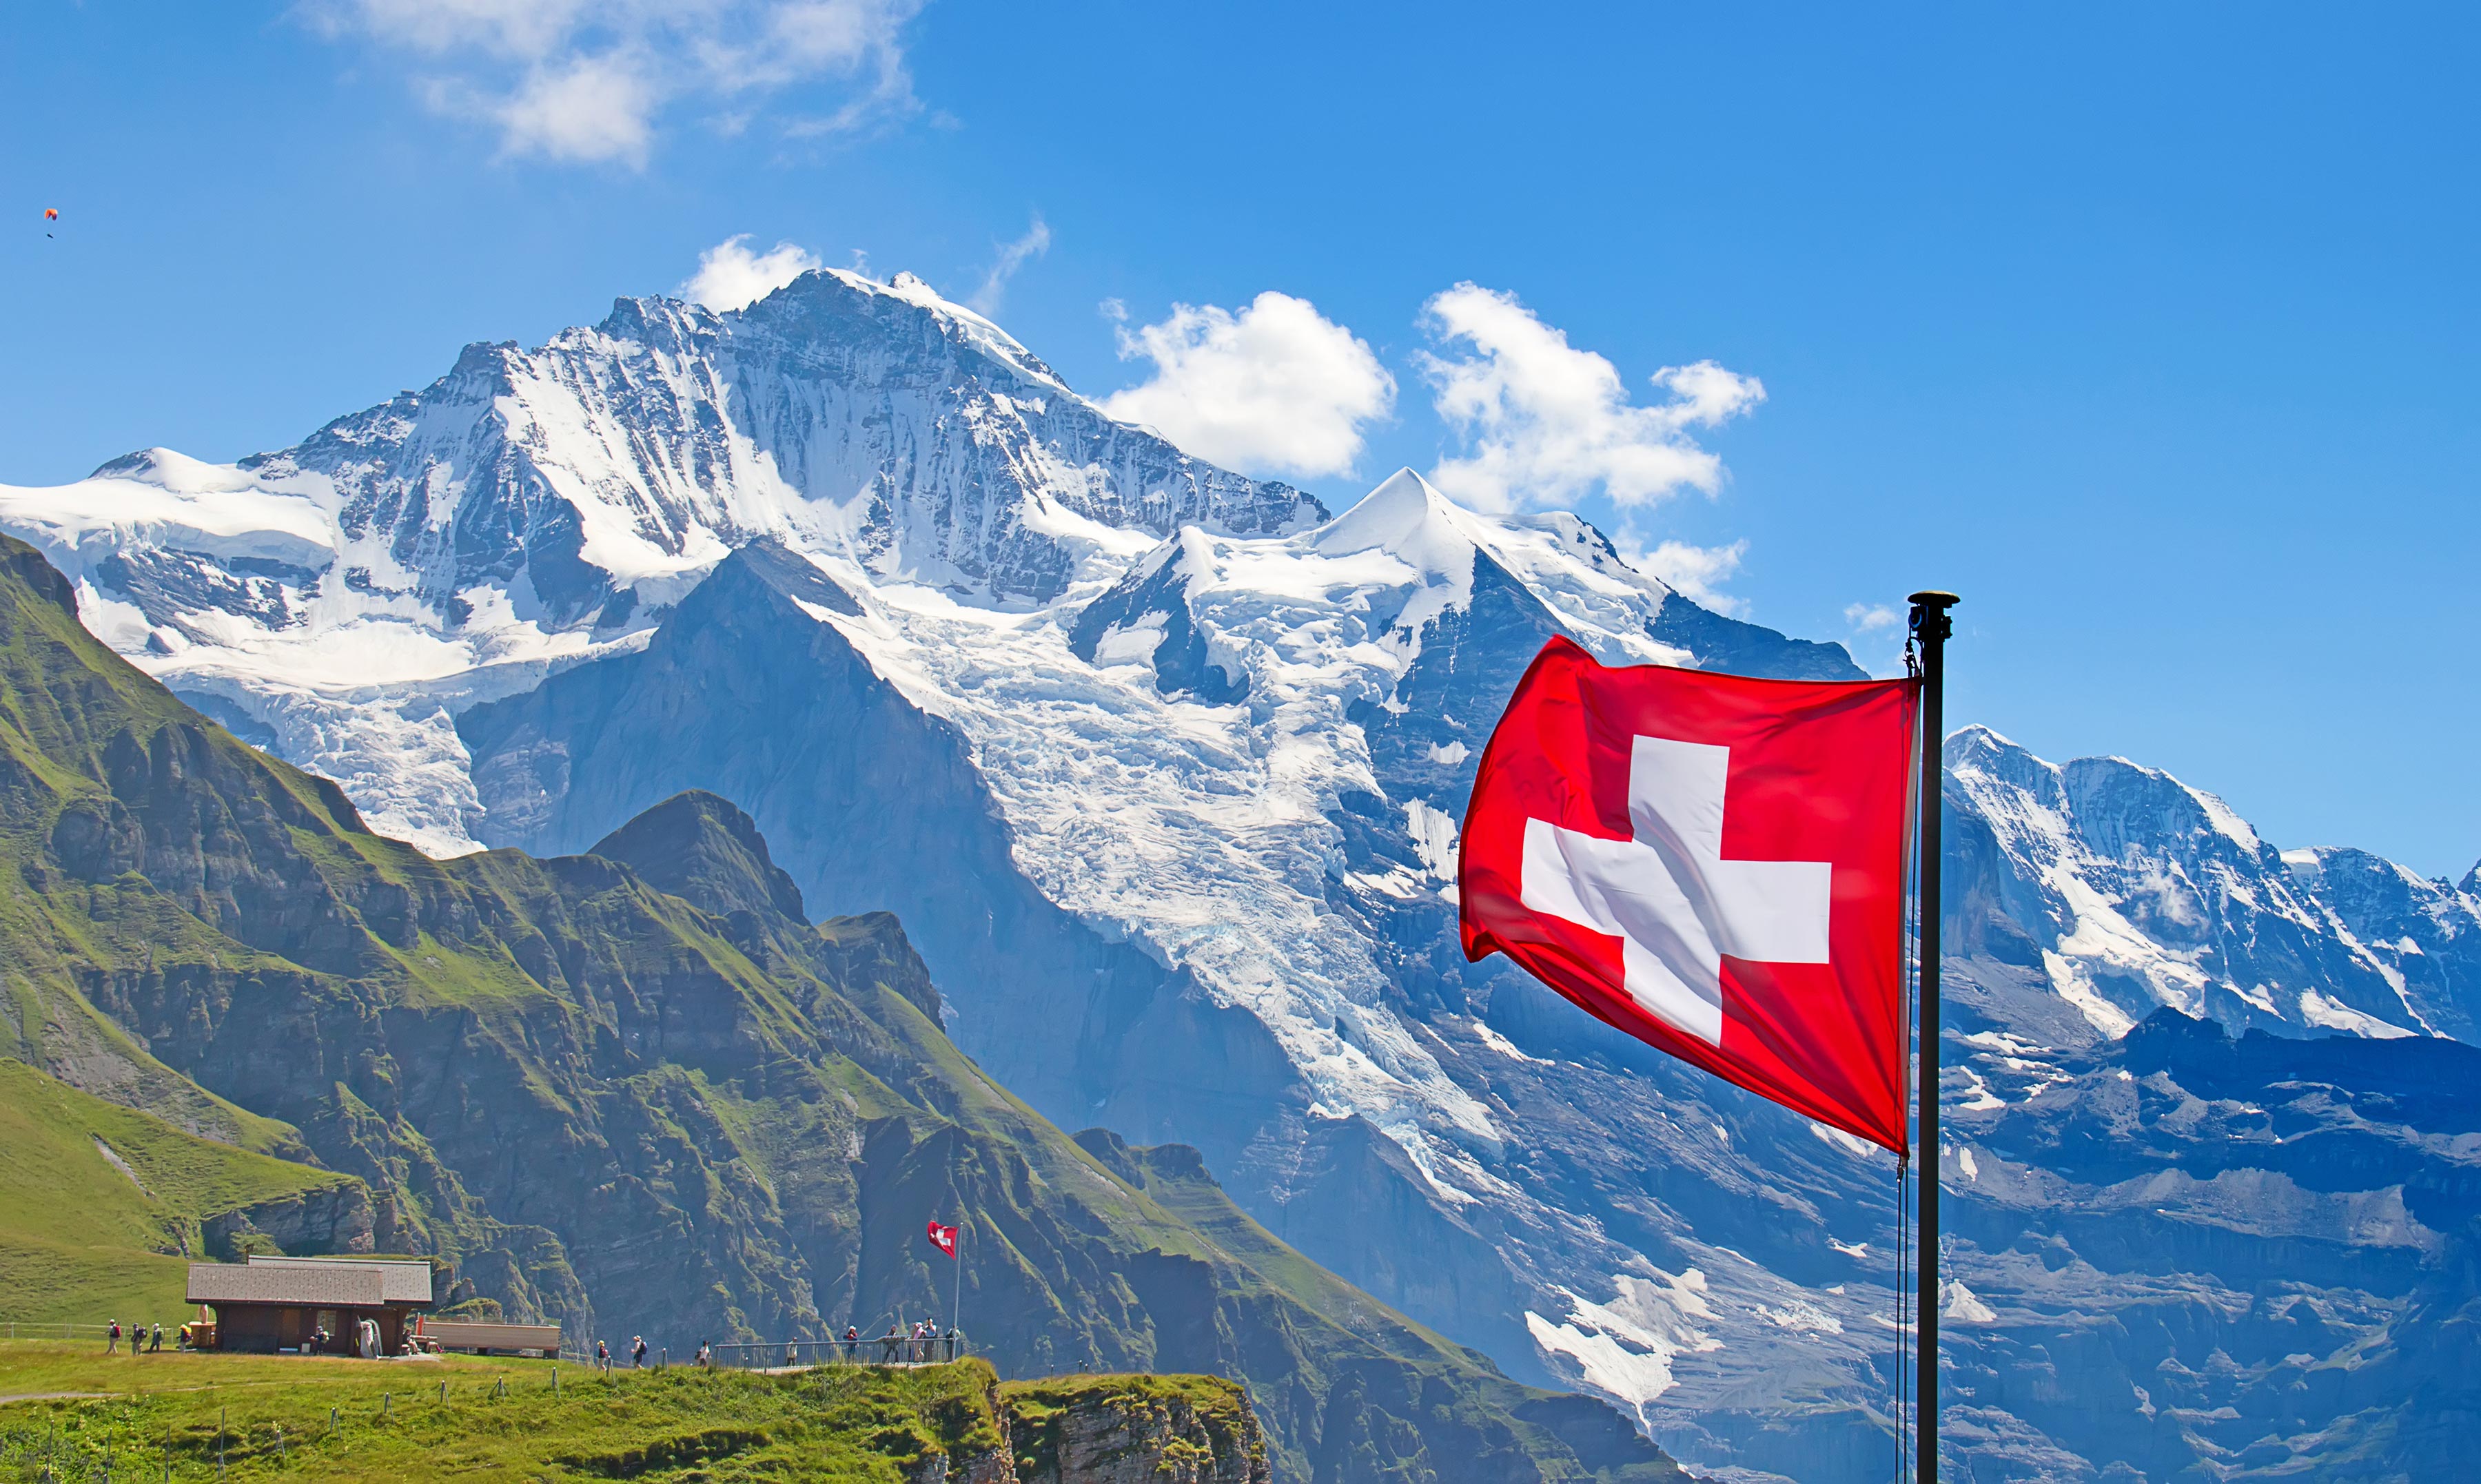 Swiss tourism amid dueling crises: A look behind the numbers